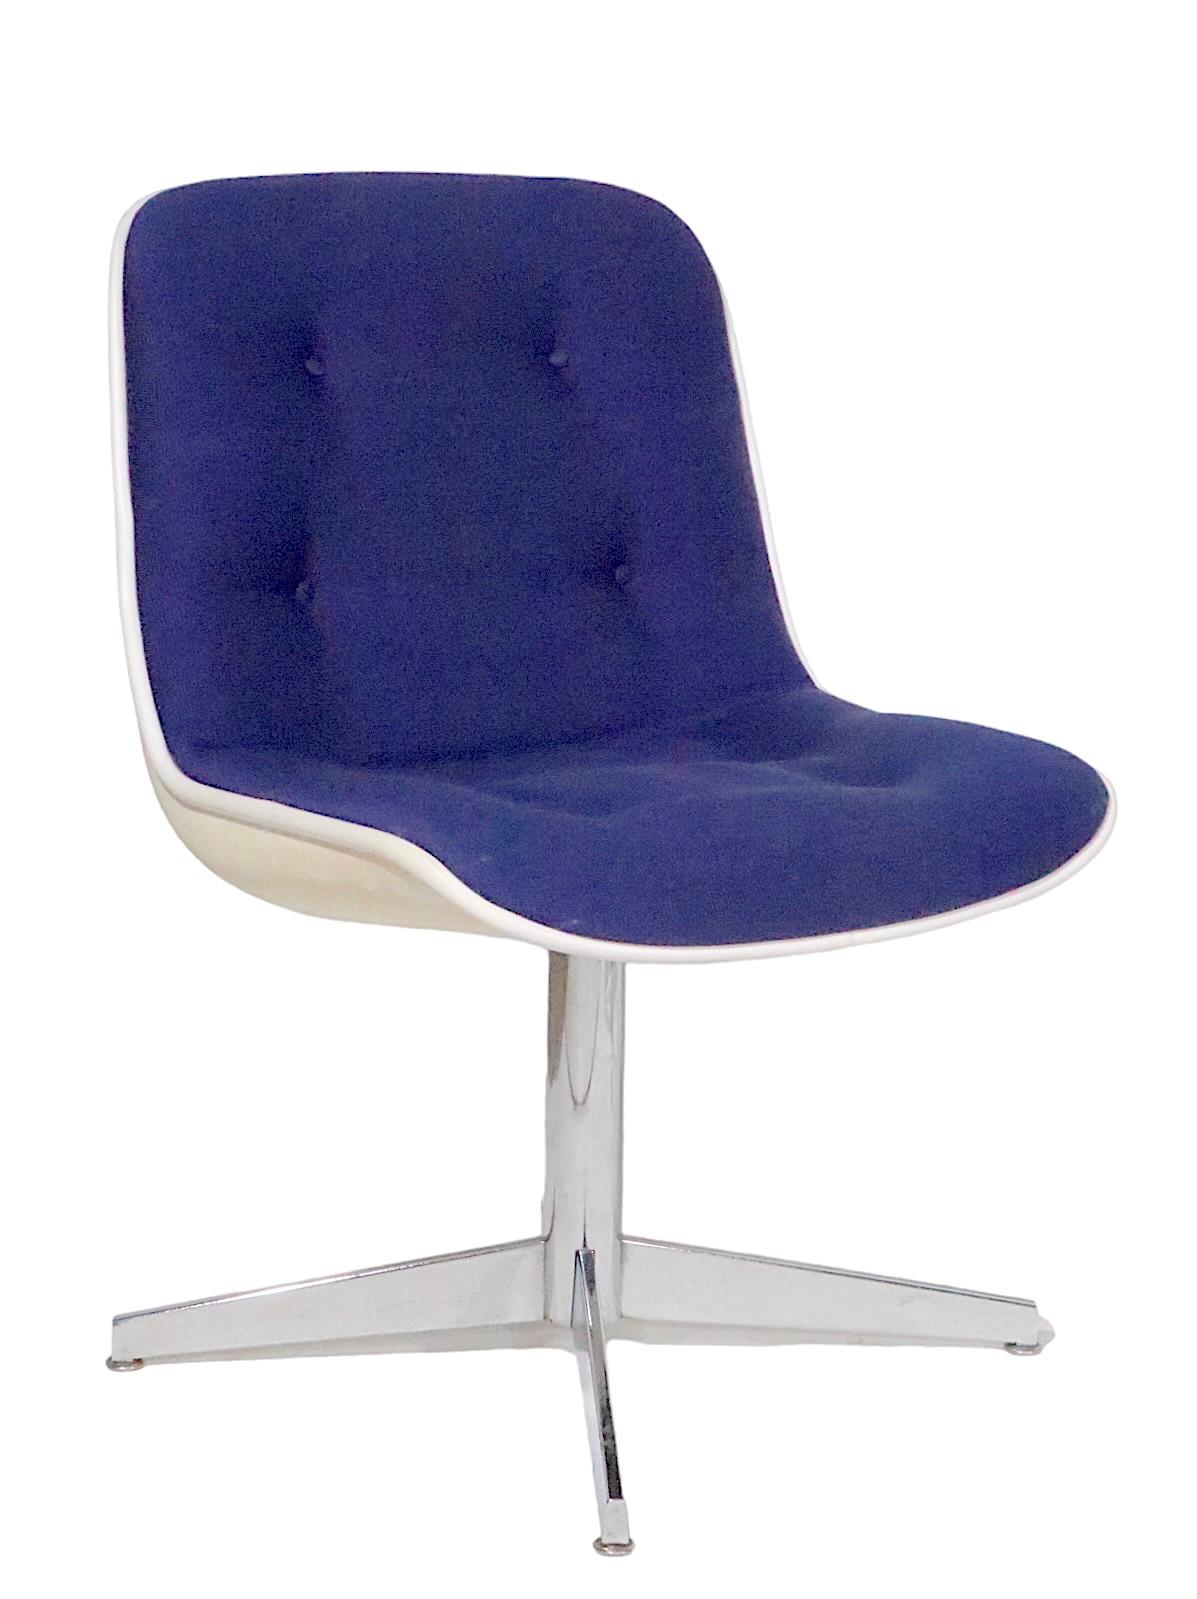 Upholstery Steelcase Swivel  Chairs in the style of Pollack c.1970's 6 available For Sale